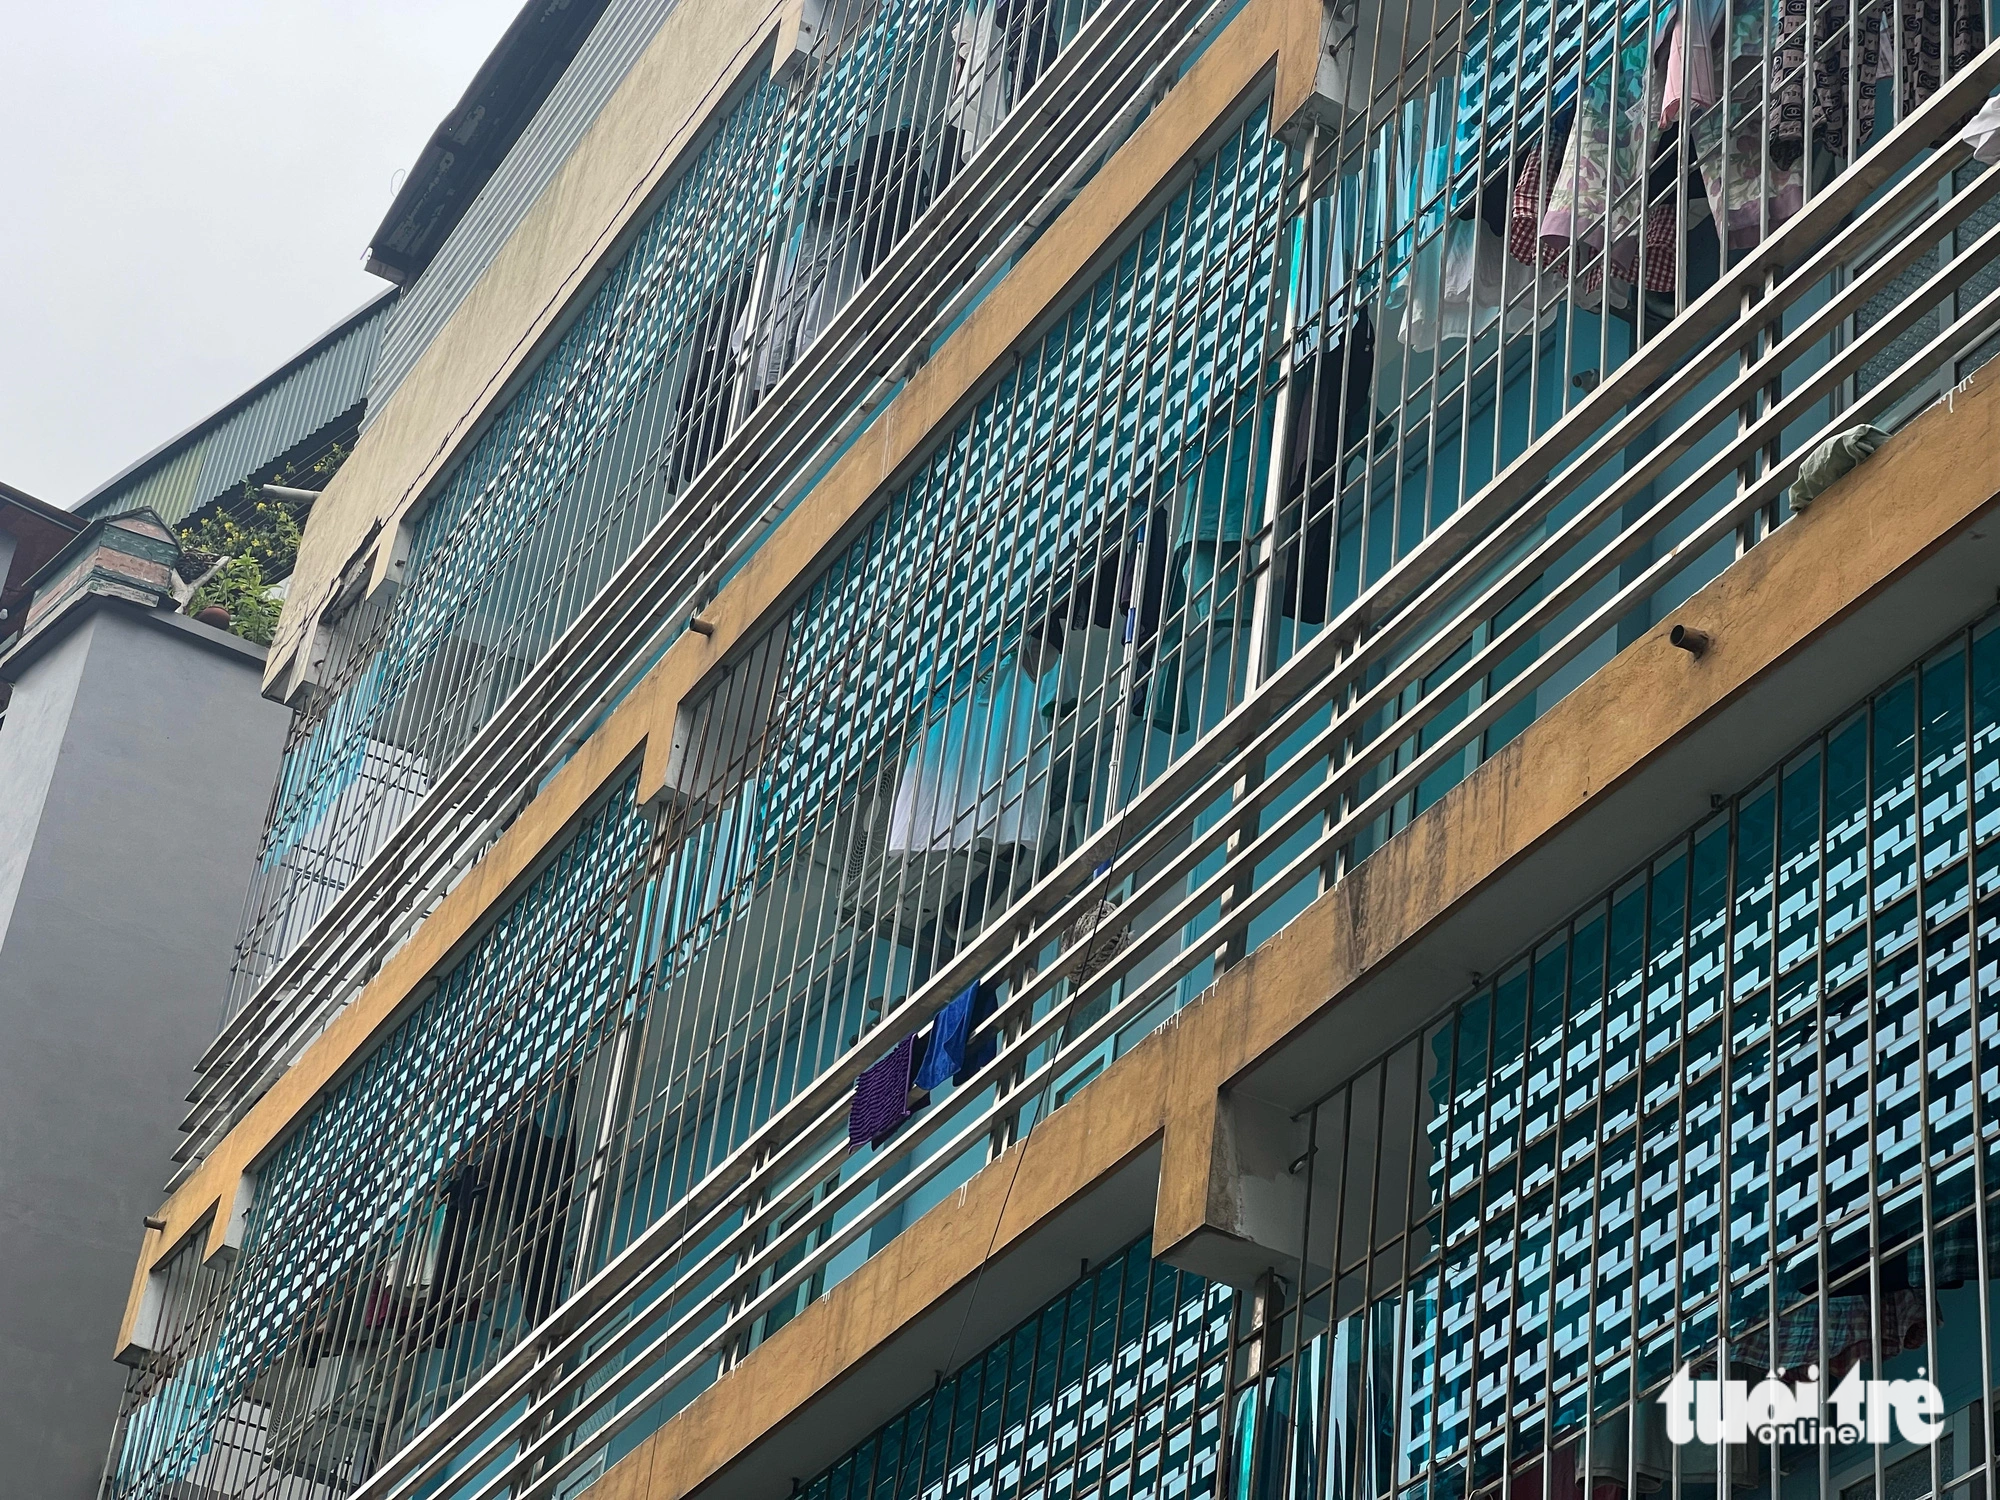 Caged-balcony apartment blocks raise fire safety concern in Hanoi